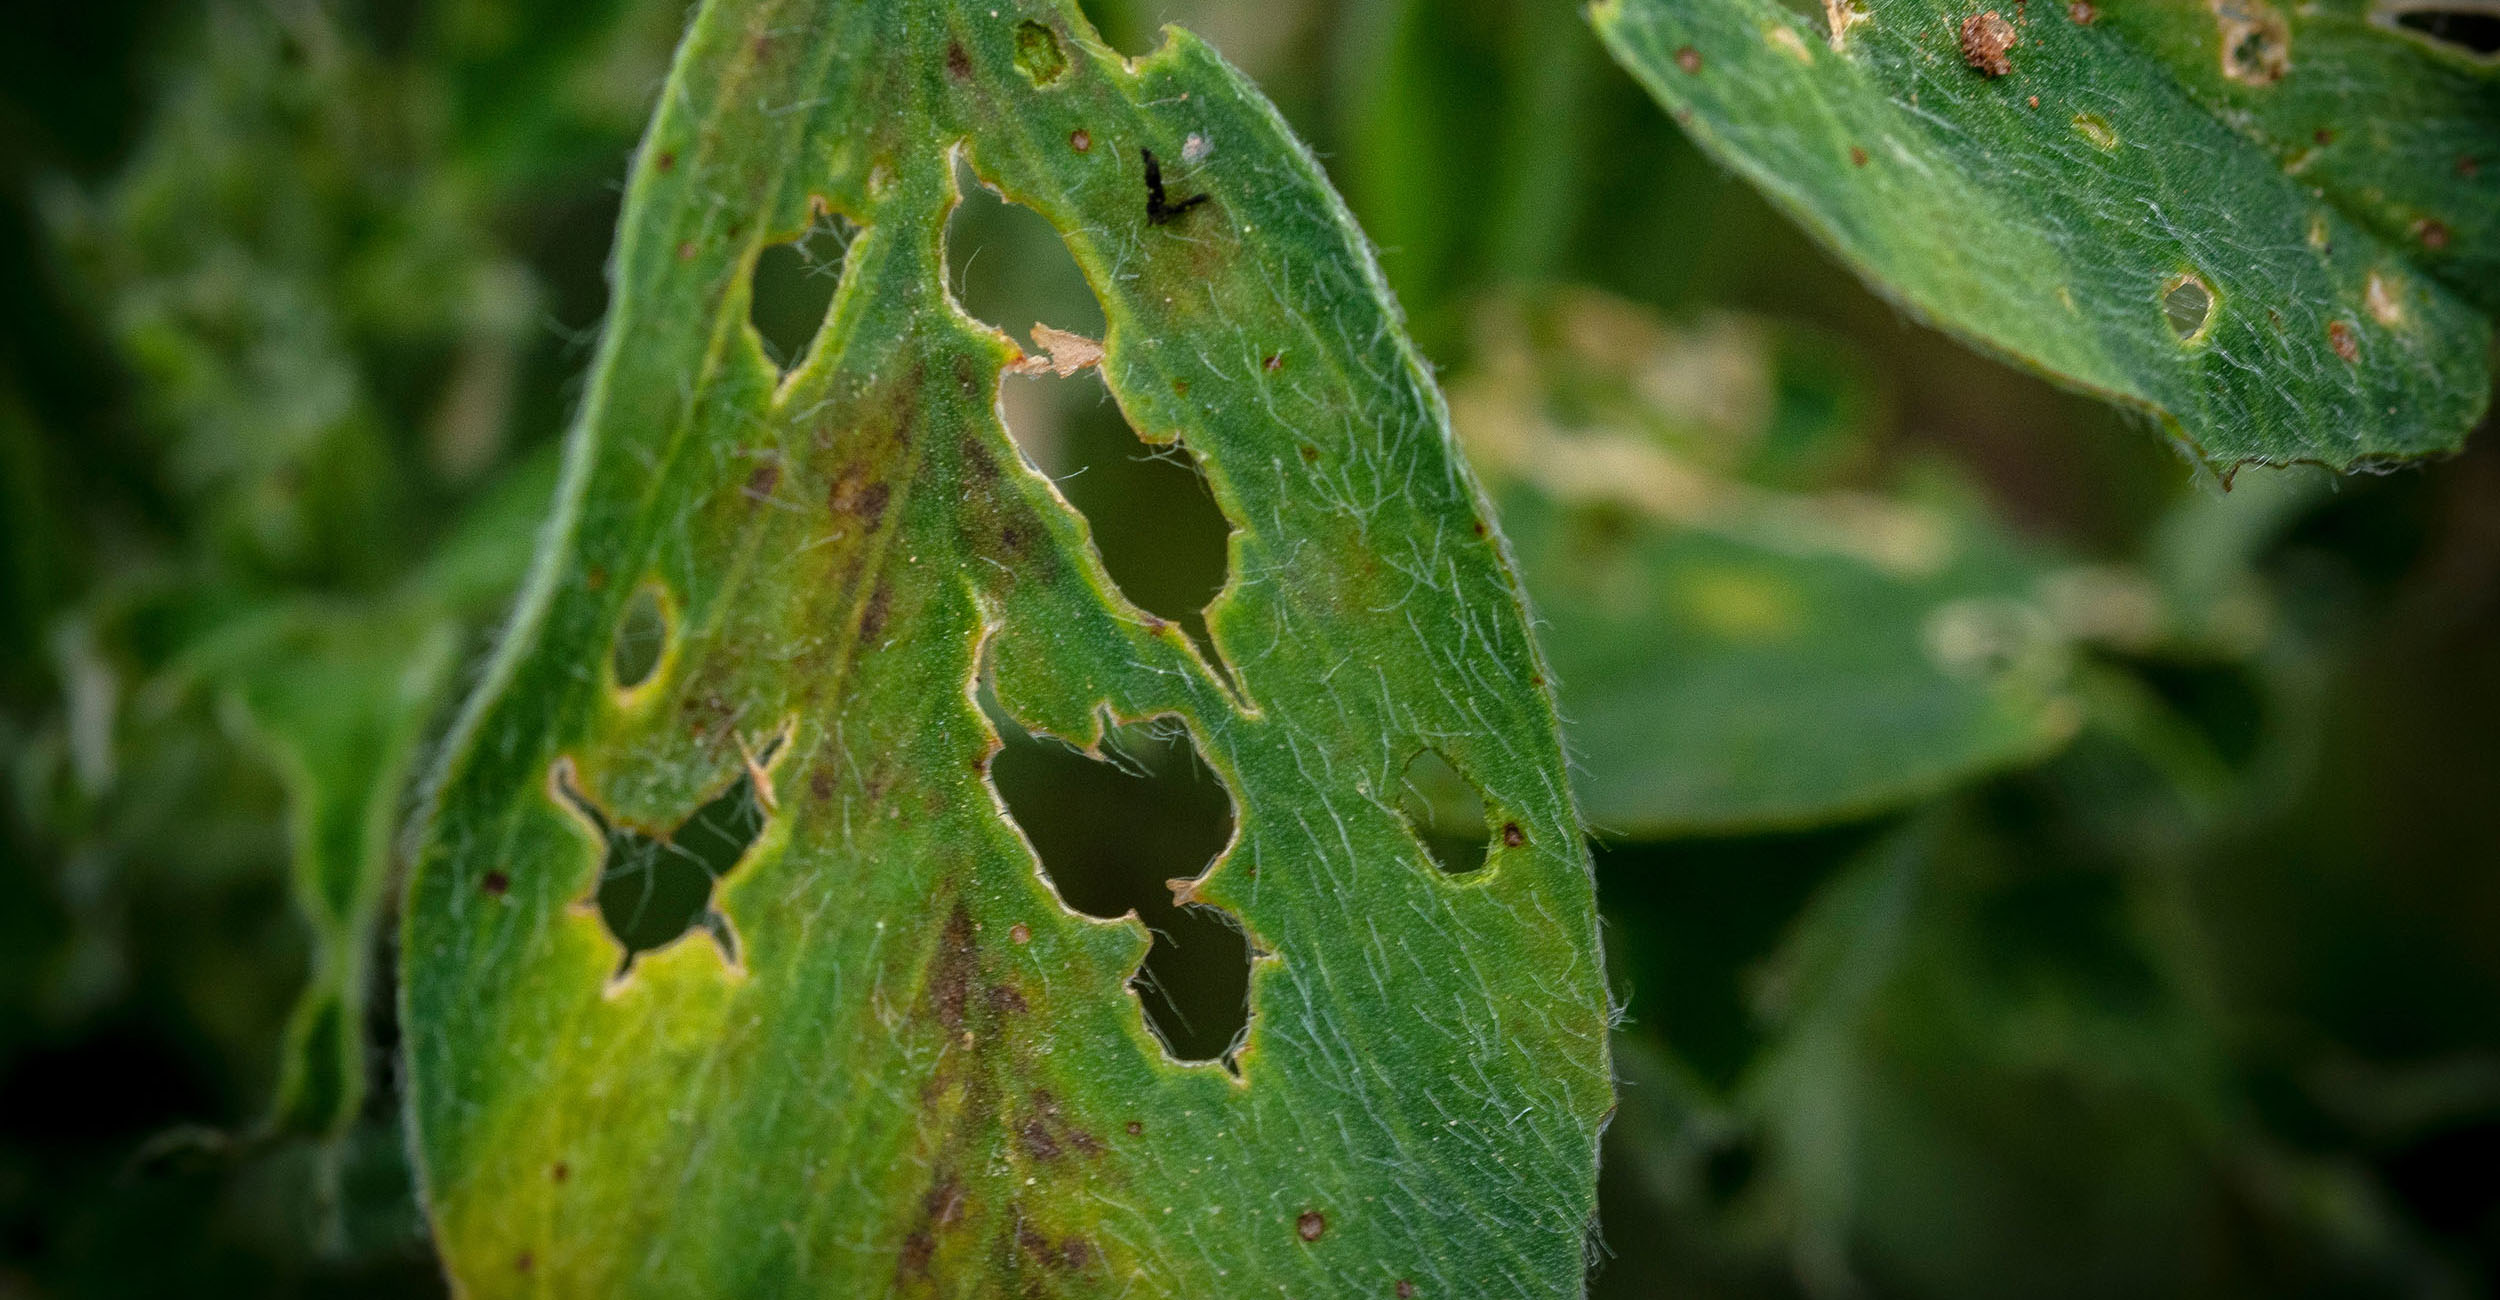 Close-up photo of insect damage to alfalfa.